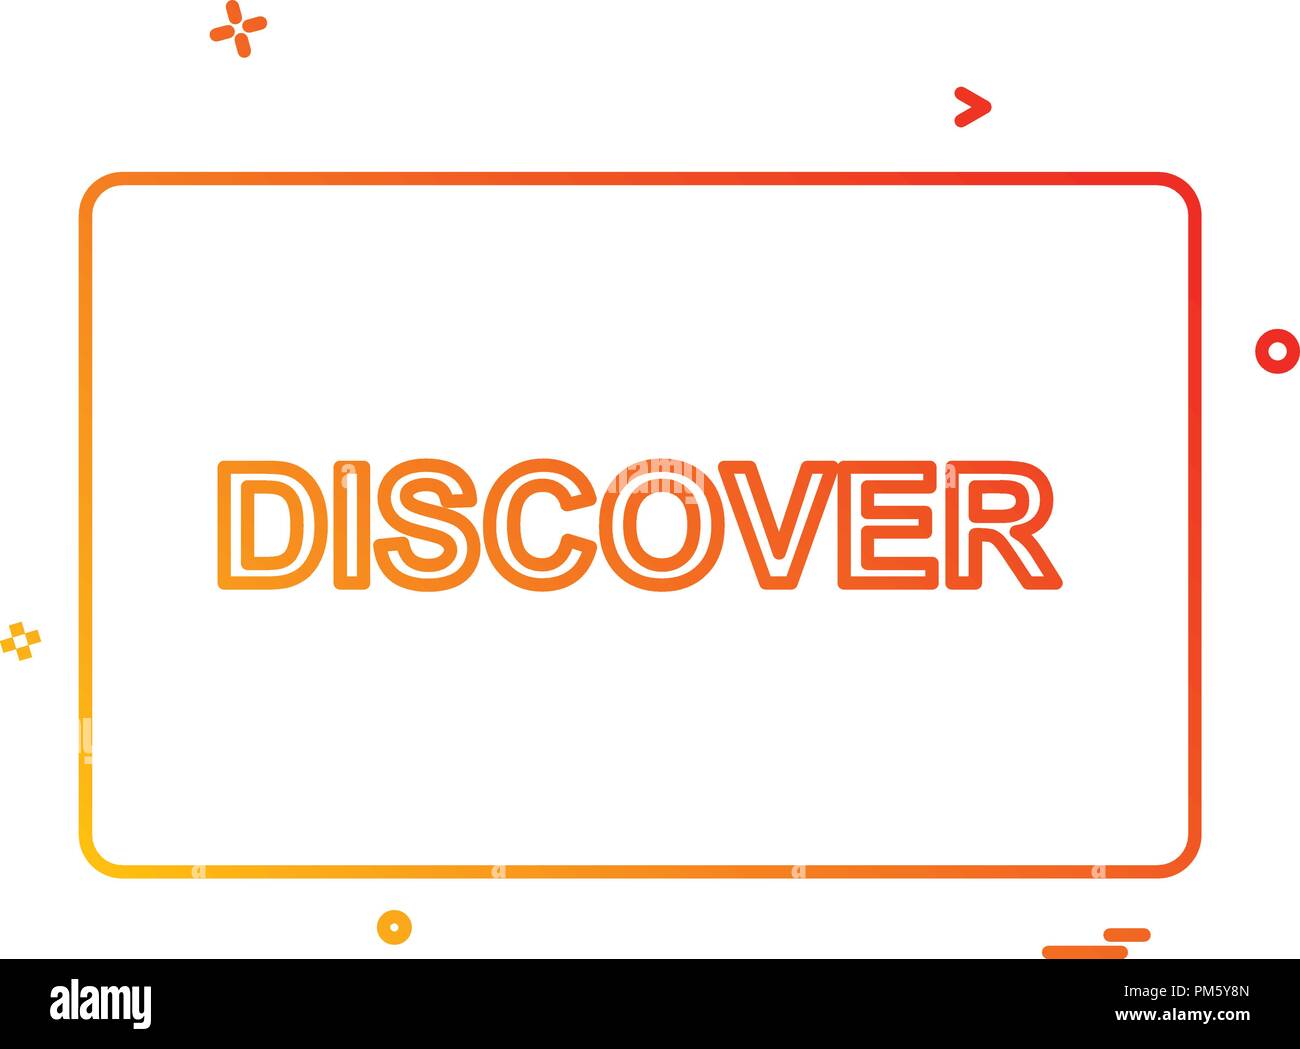 Discover Credit Card Stock Vector Images Alamy